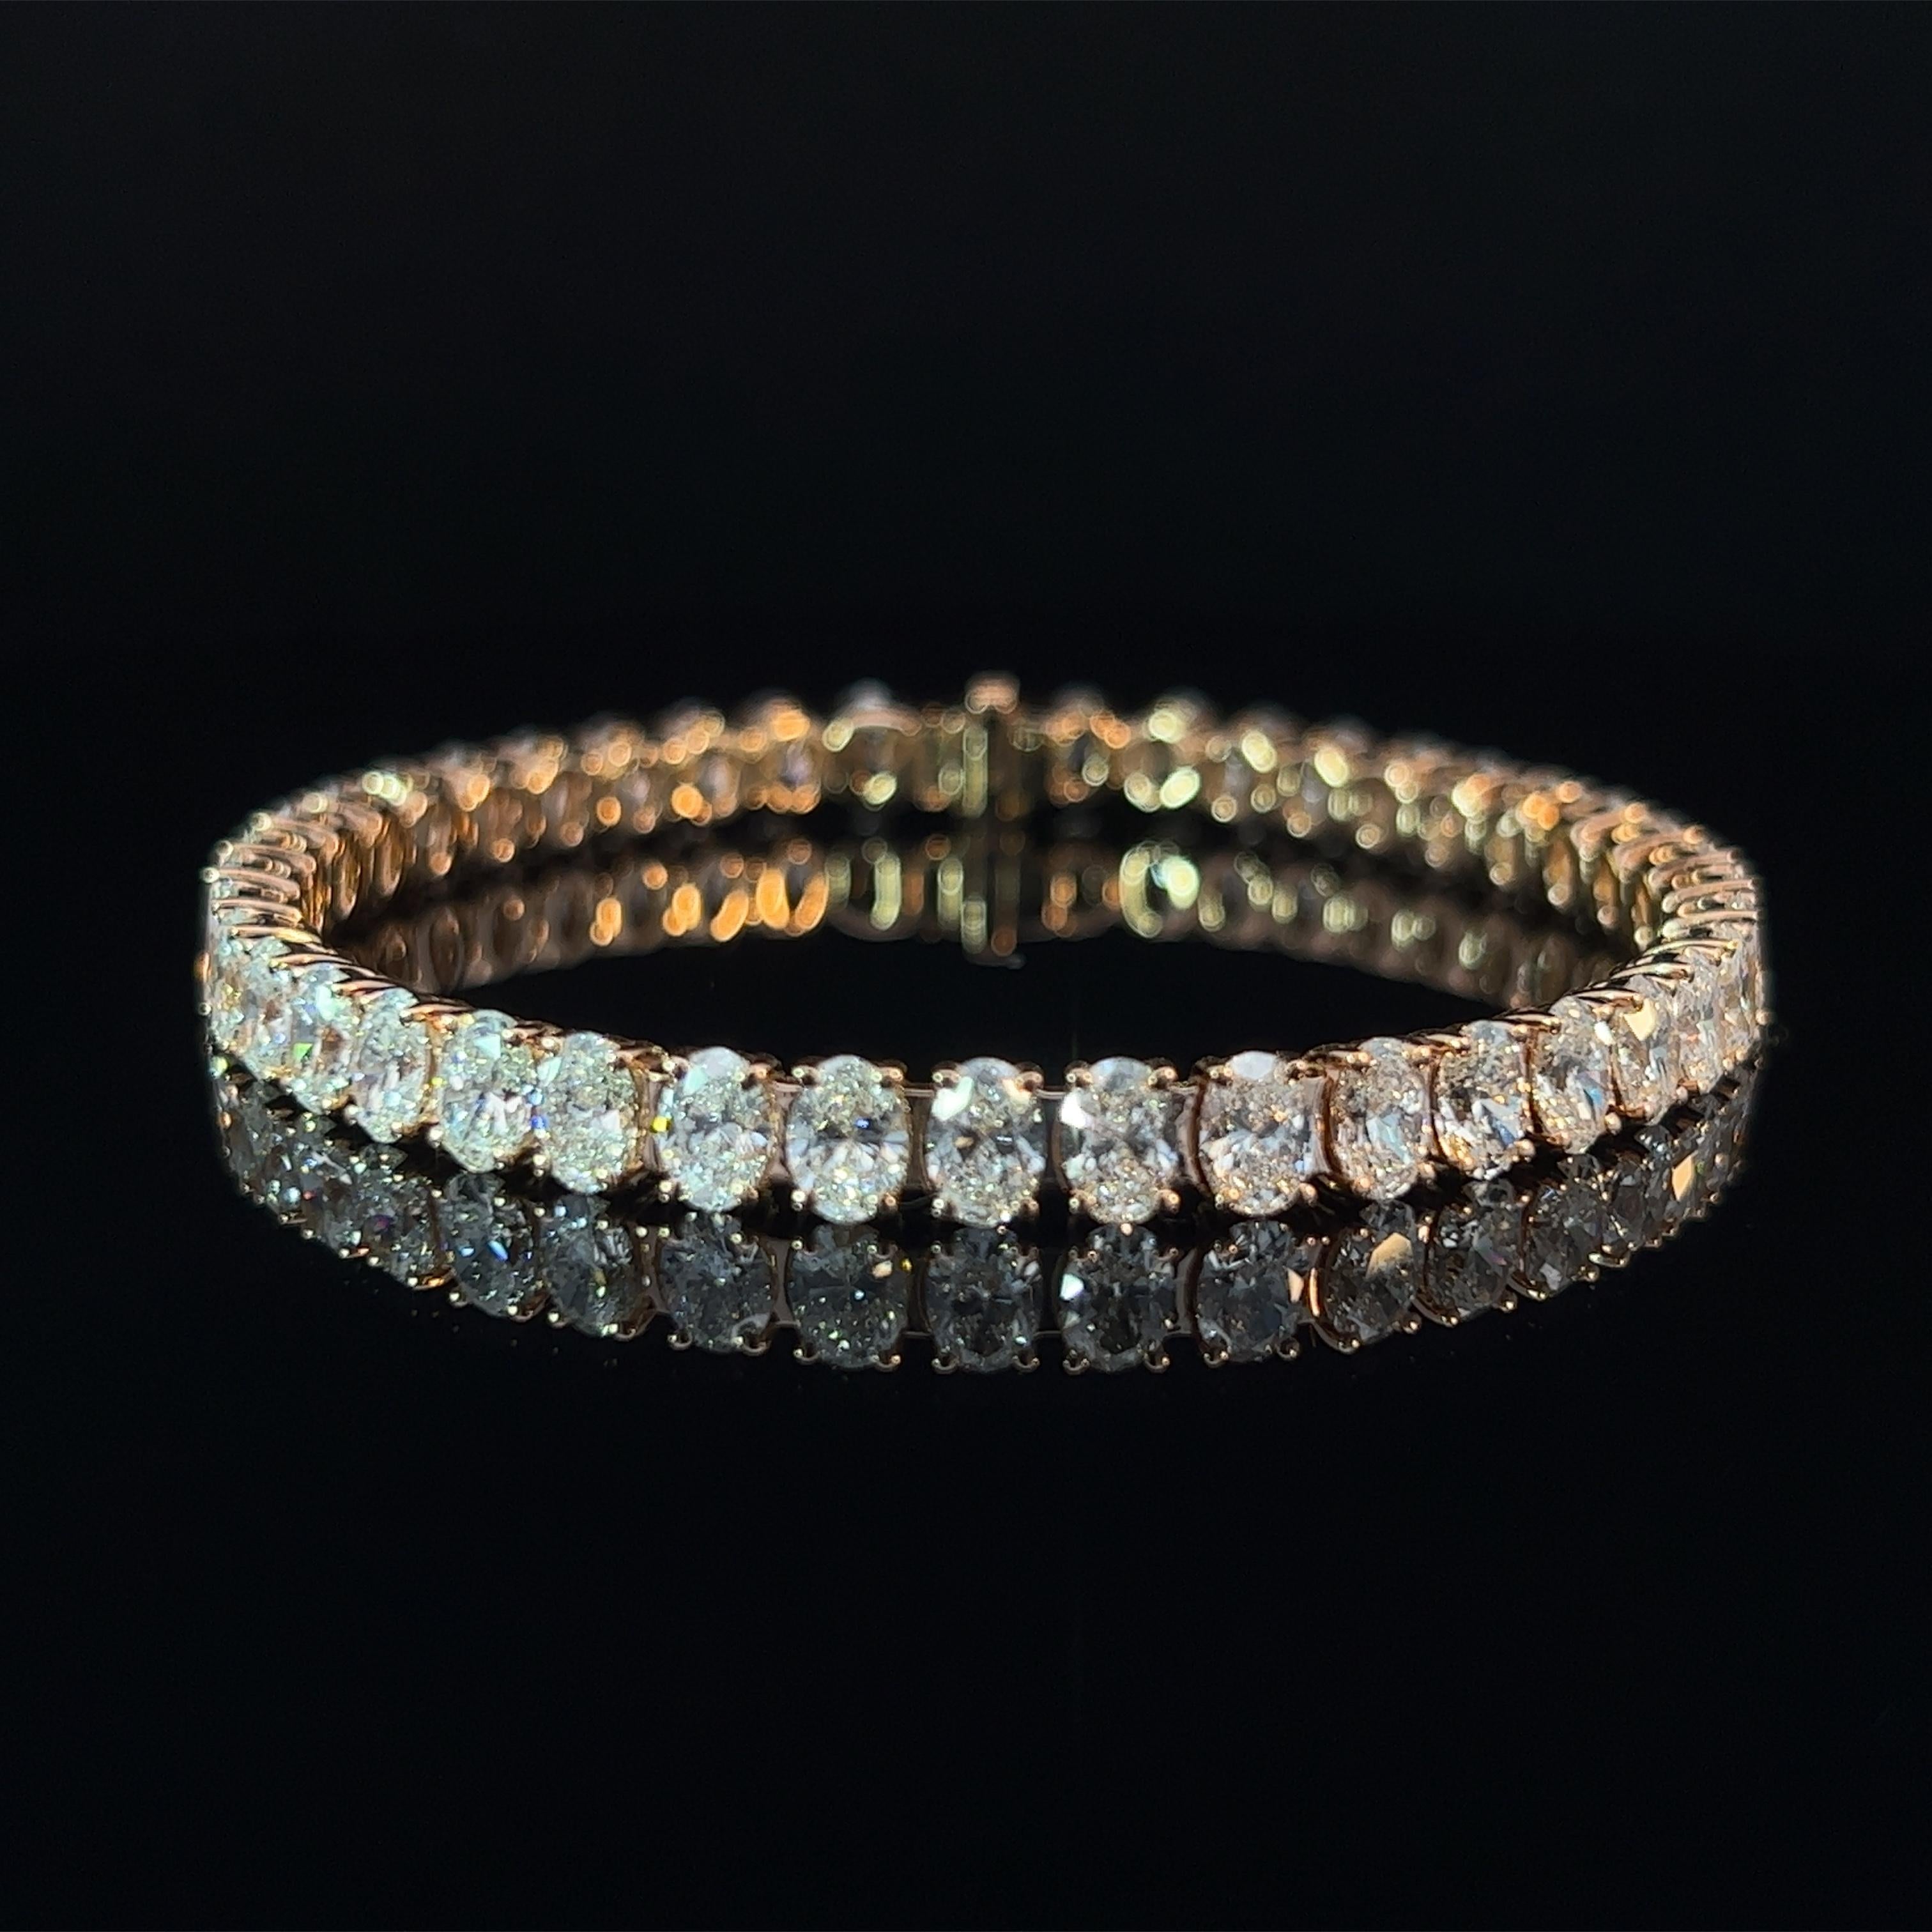 Diamond Shape: Oval Cut 
Total Diamond Weight: 13.2ct
Individual Diamond Weight: .33ct
Color/Clarity: GH VVS  
Metal: 18K Rose Gold  
Metal Weight: 16.46g 

Key Features:

Oval-Cut Diamonds: The centerpiece of this bracelet features a dazzling array